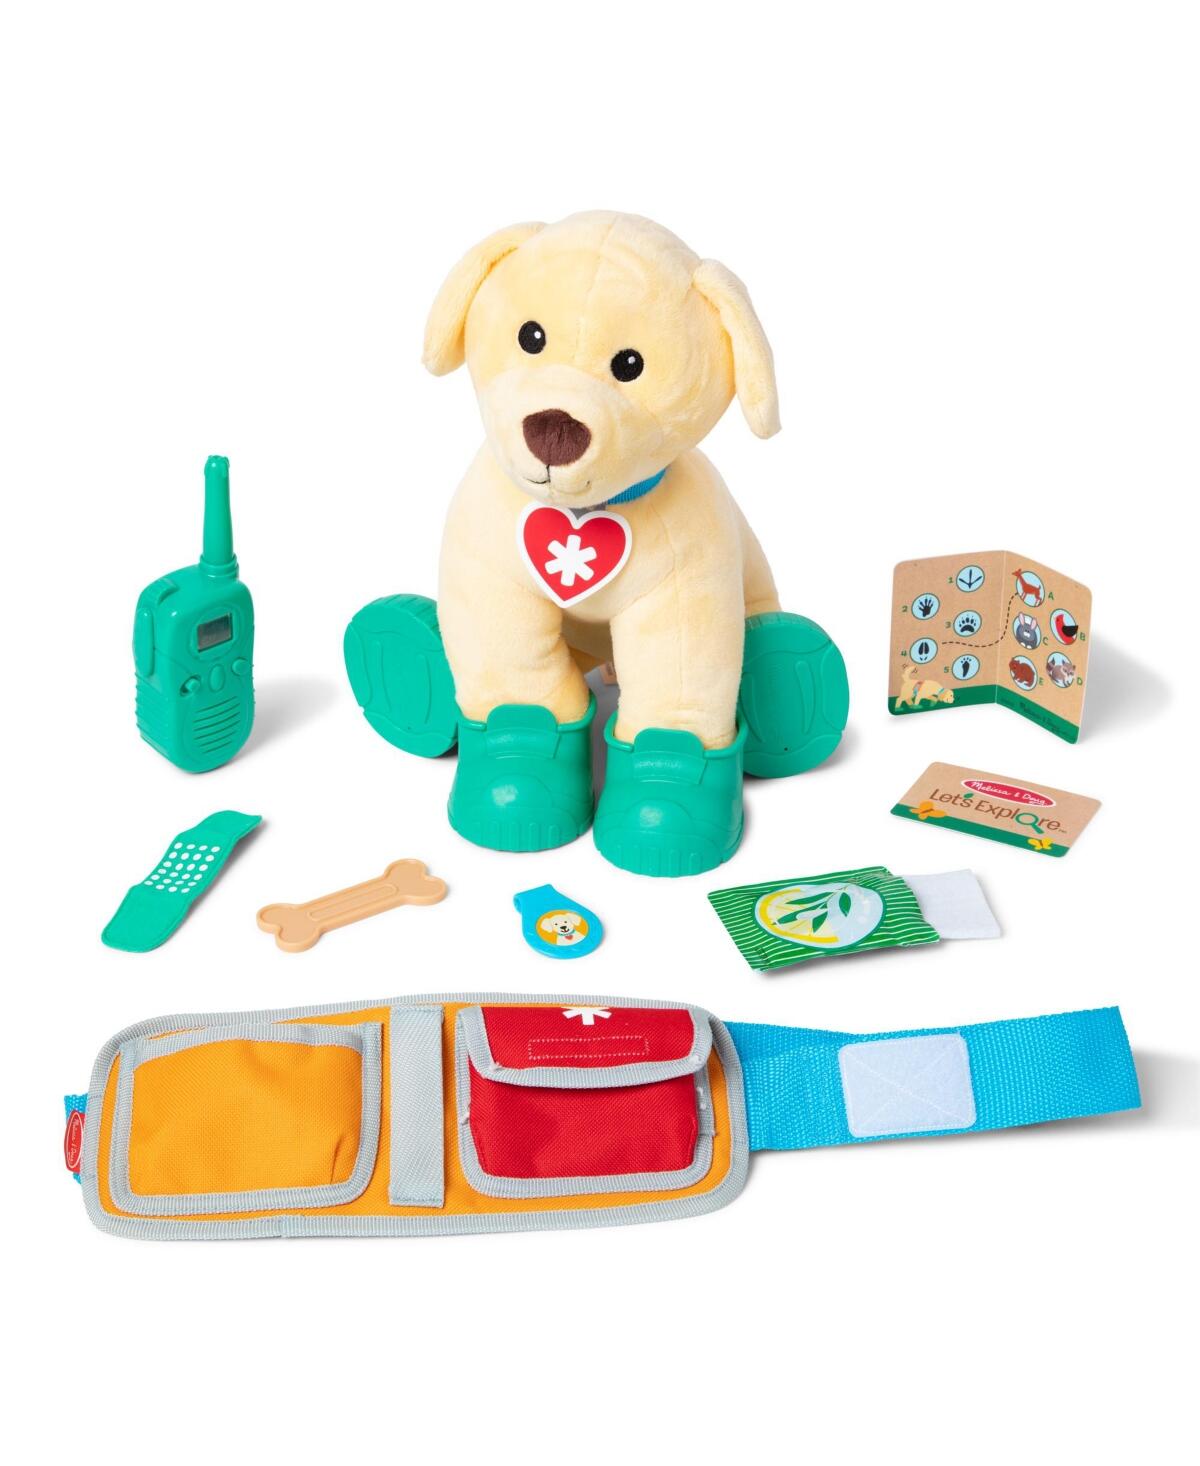 Melissa &amp; Doug Let’s Explore™ Ranger Dog Plush with Search and Rescue Gear Search and Rescue Dog Stuffed Animal for Kids Ages 3+